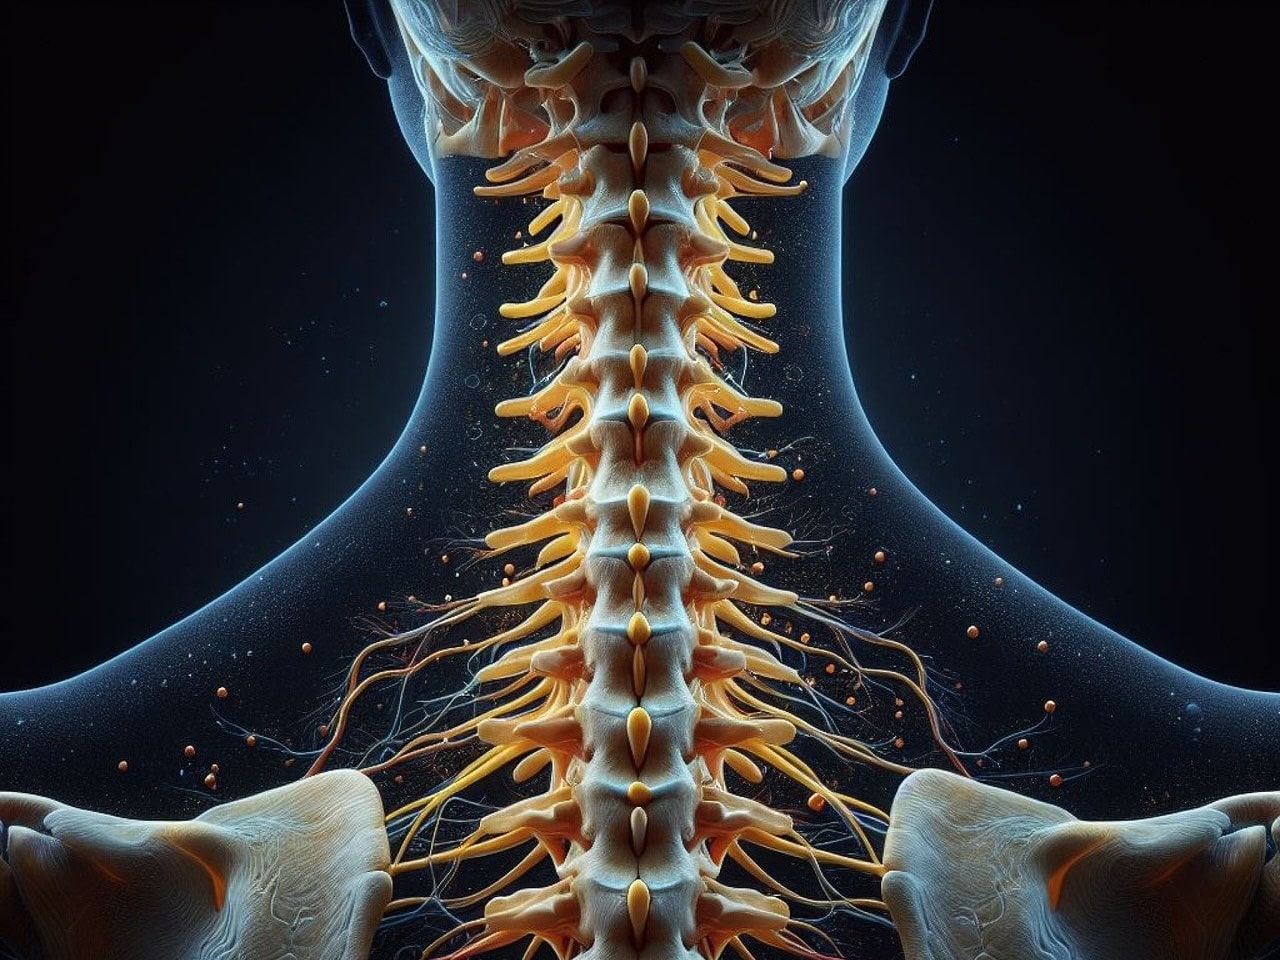  Is there memory without a brain?  The spinal cord also remembers

